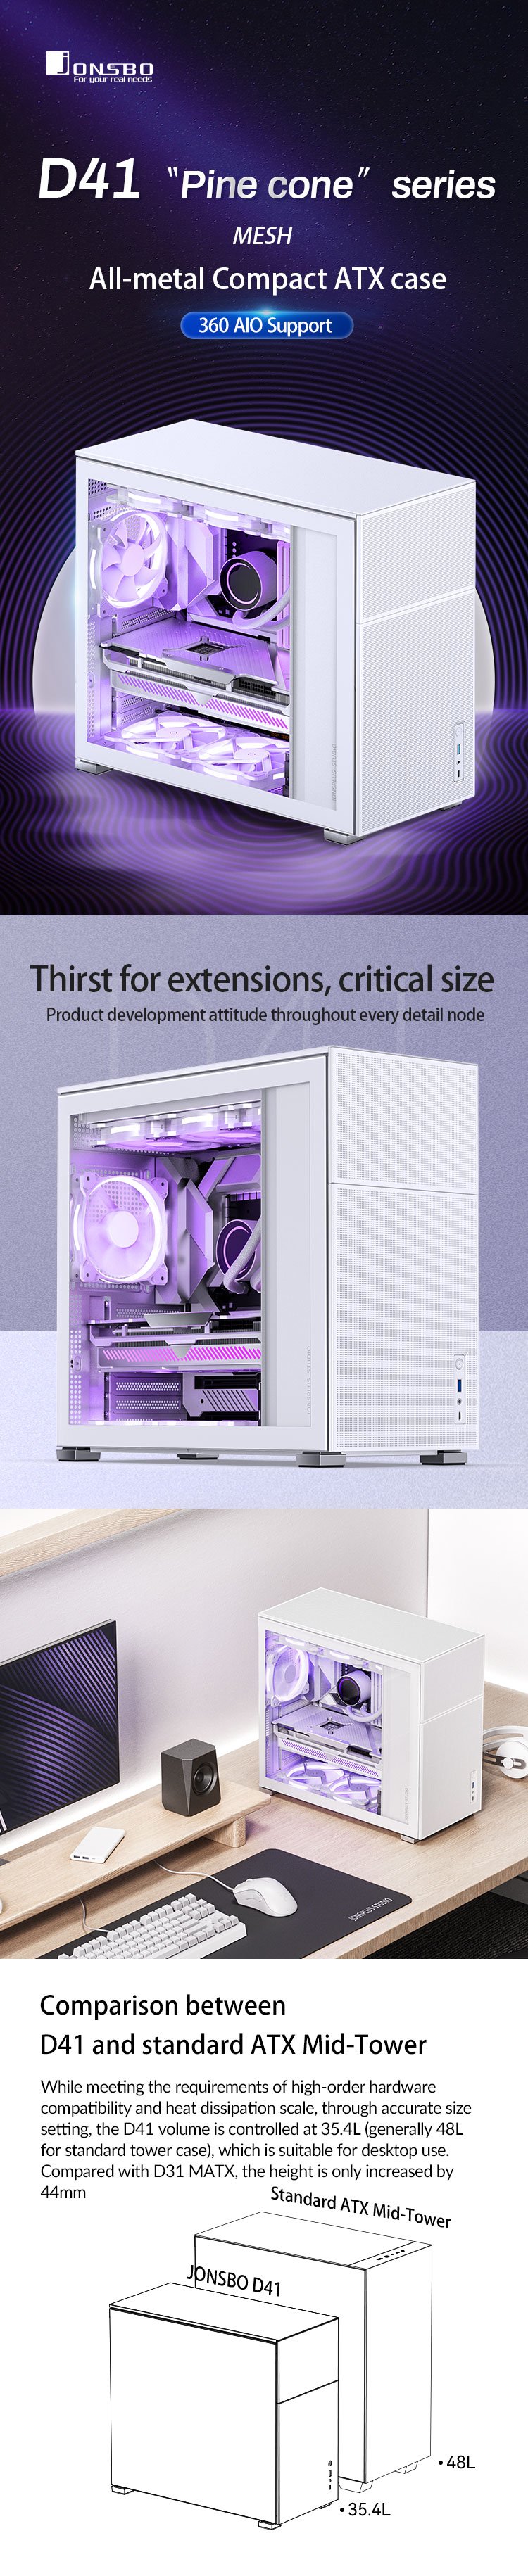 JONSBO D41MESH WHITE ATX Computer Case, Tempered Glass-1 Side